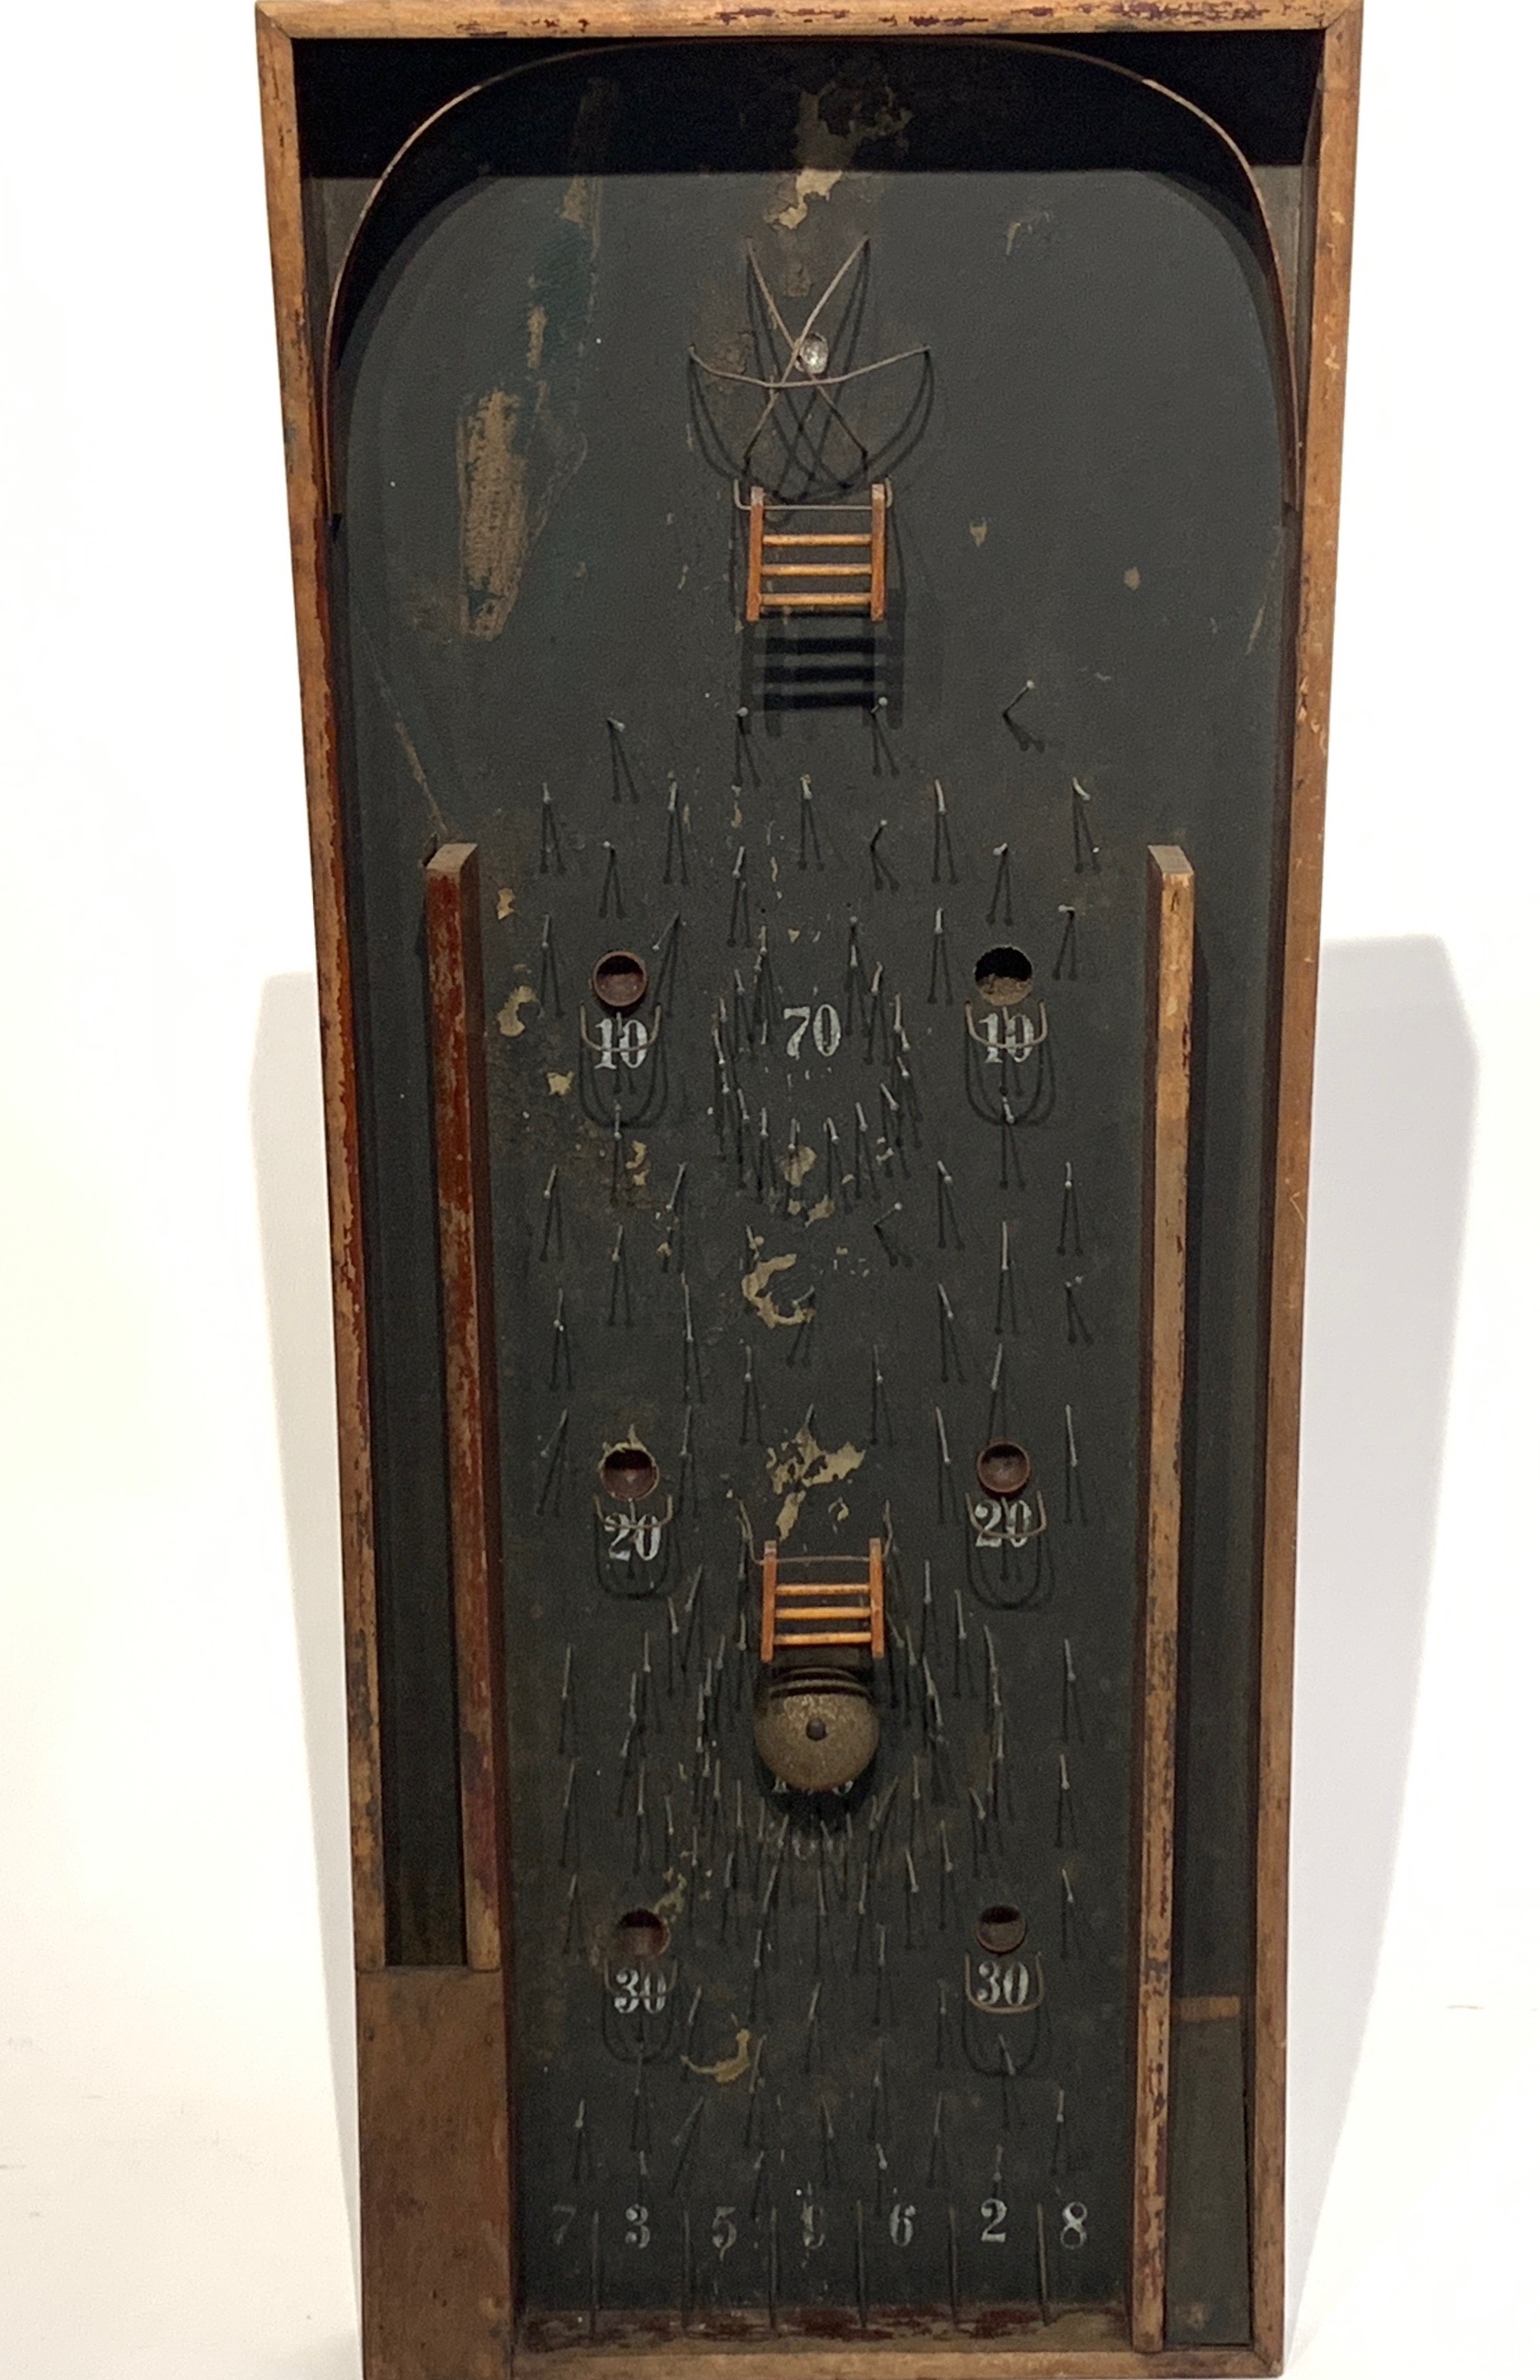    Painted wood, 37" x 14.5" x 3", American, 20th century  